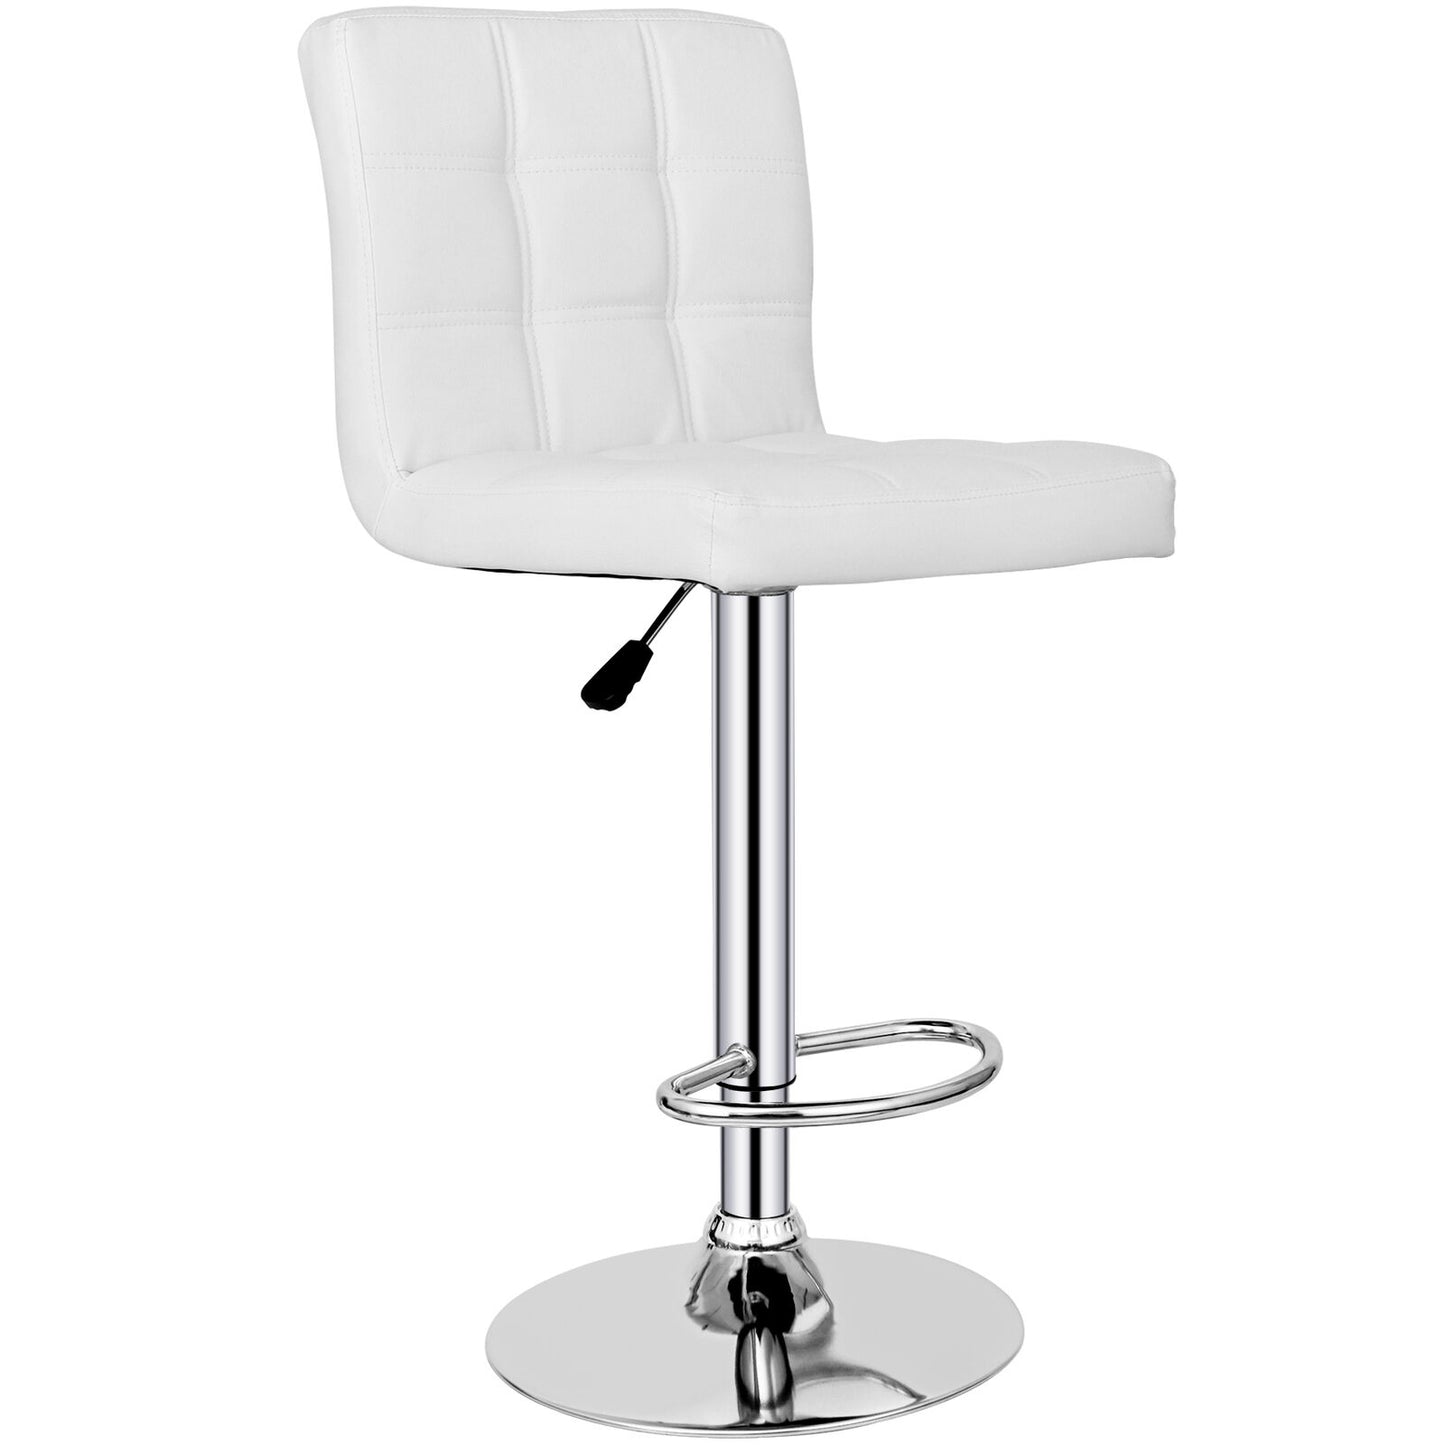 Set of 2 Adjustable Bar Stools PU Leather Modern Dinning Chair with White